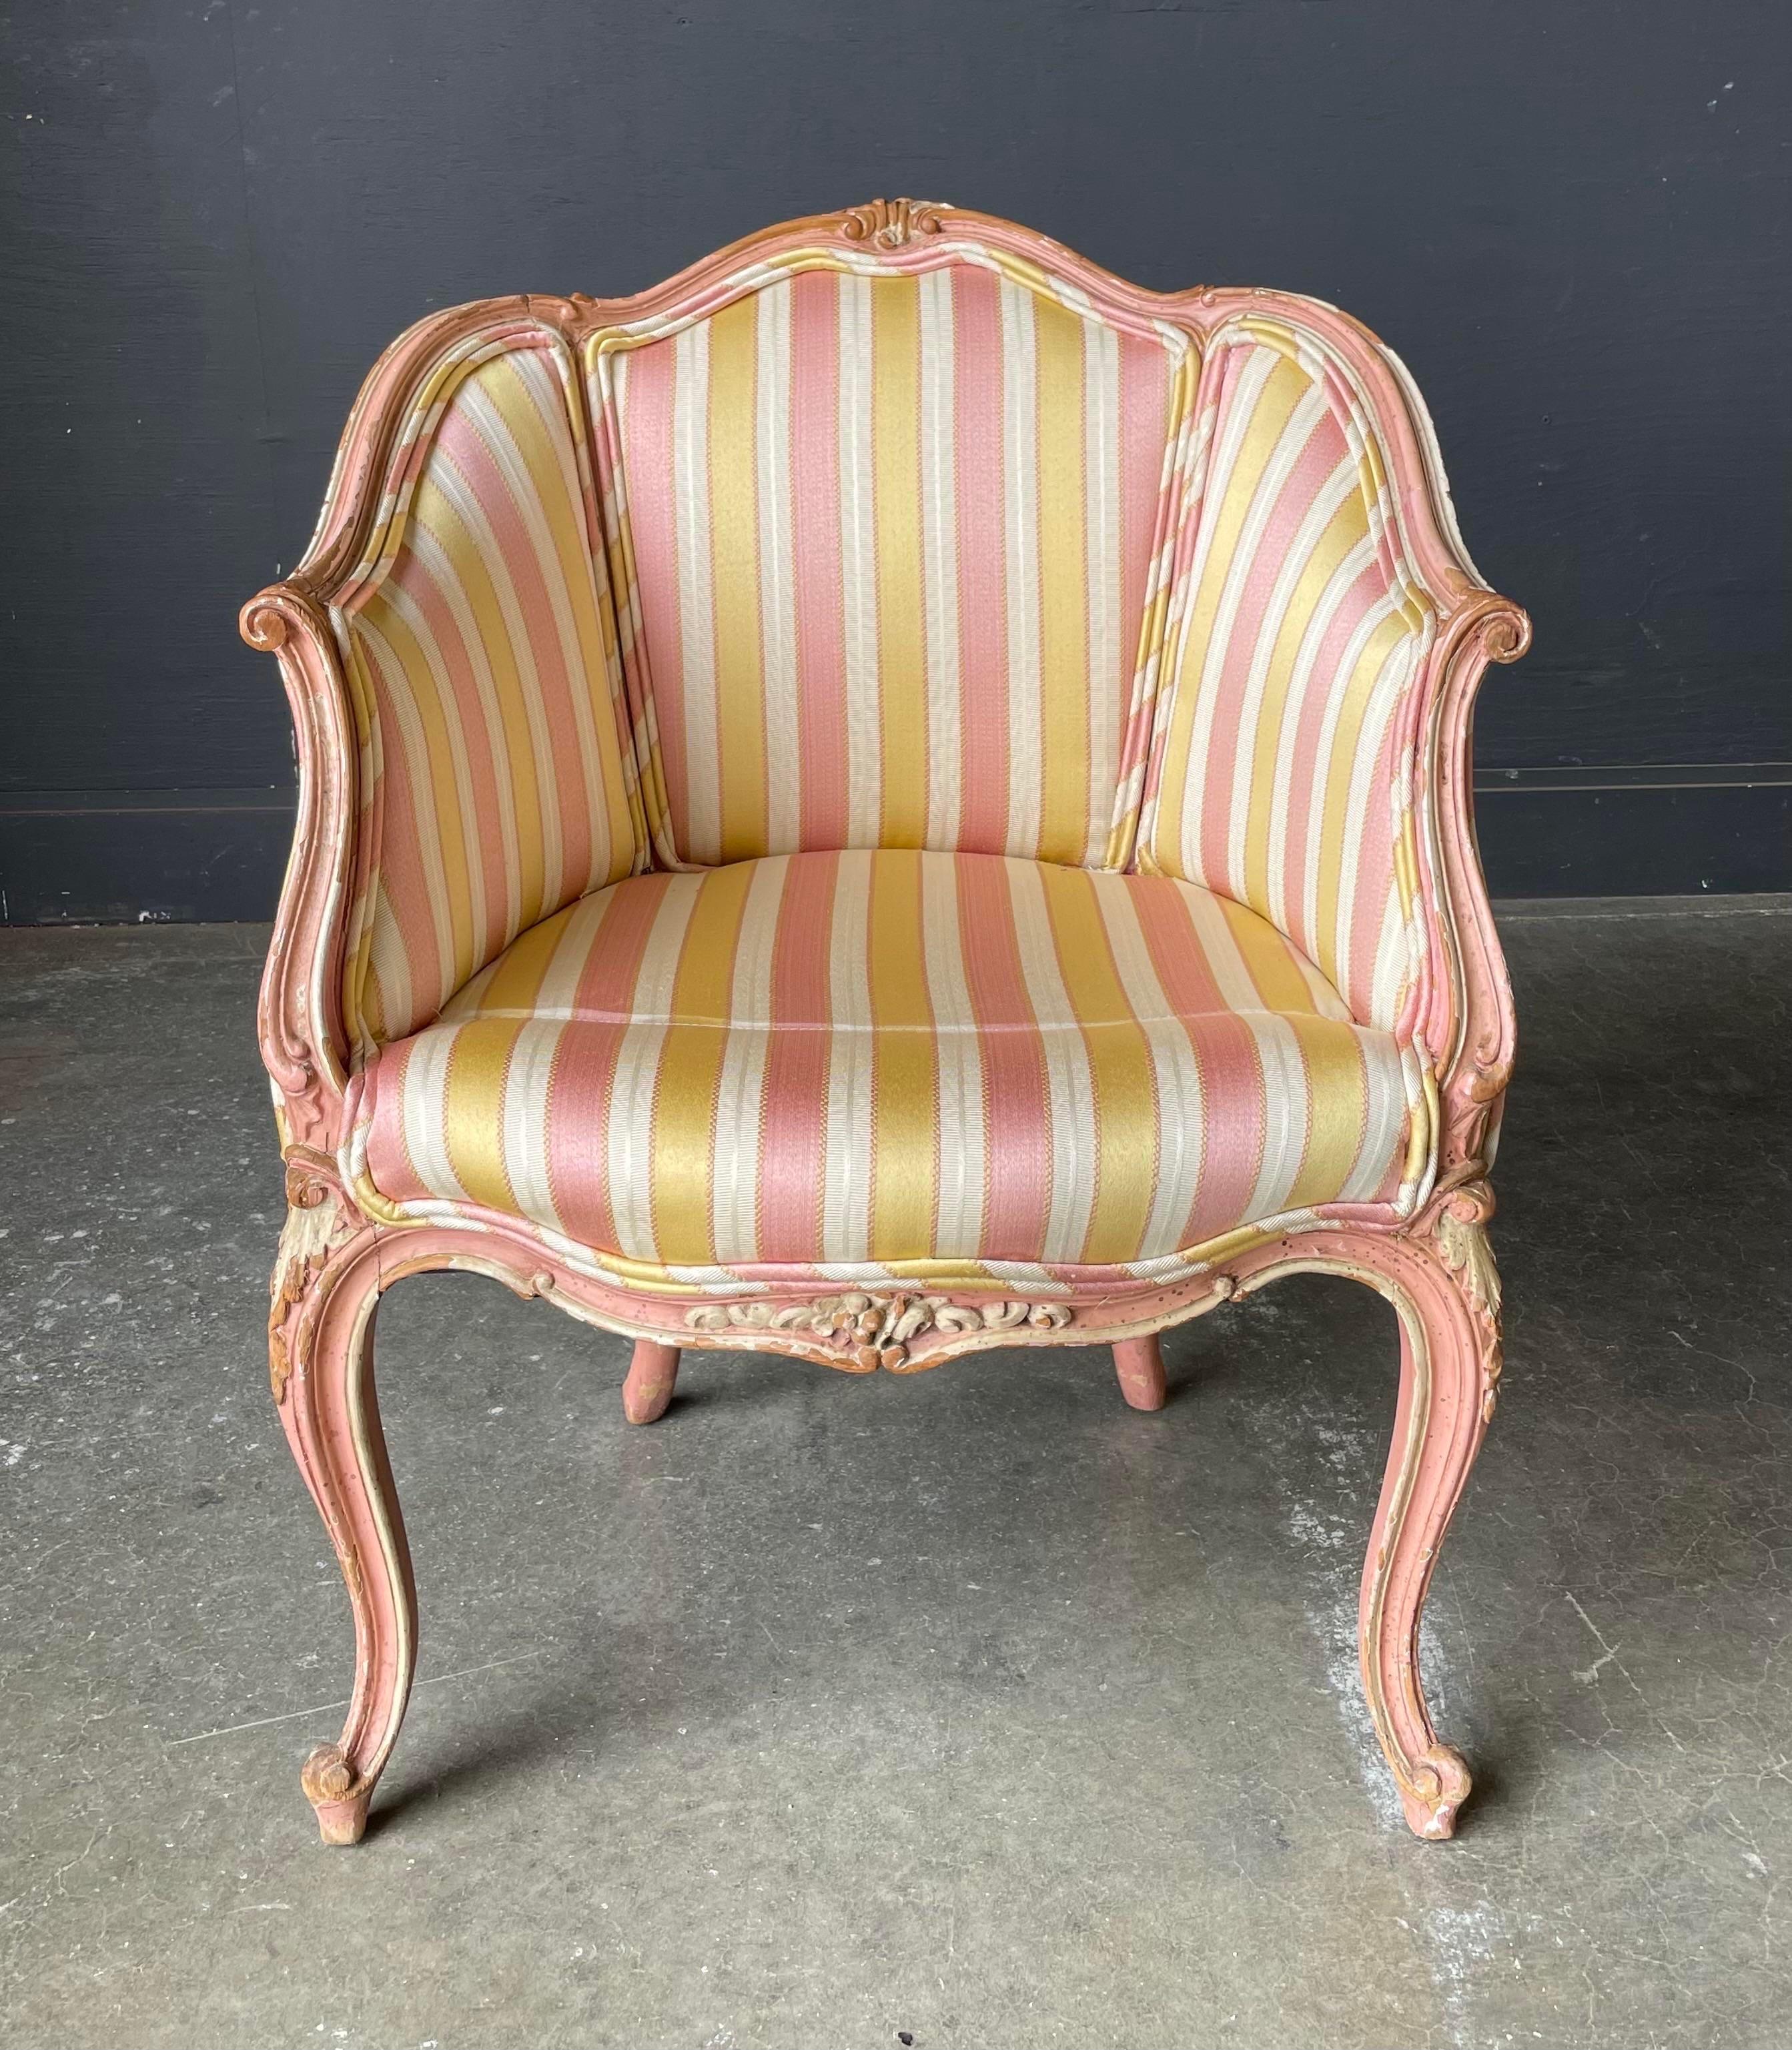 20th Century Louis XV Style Bergere Chairs - a Pair For Sale